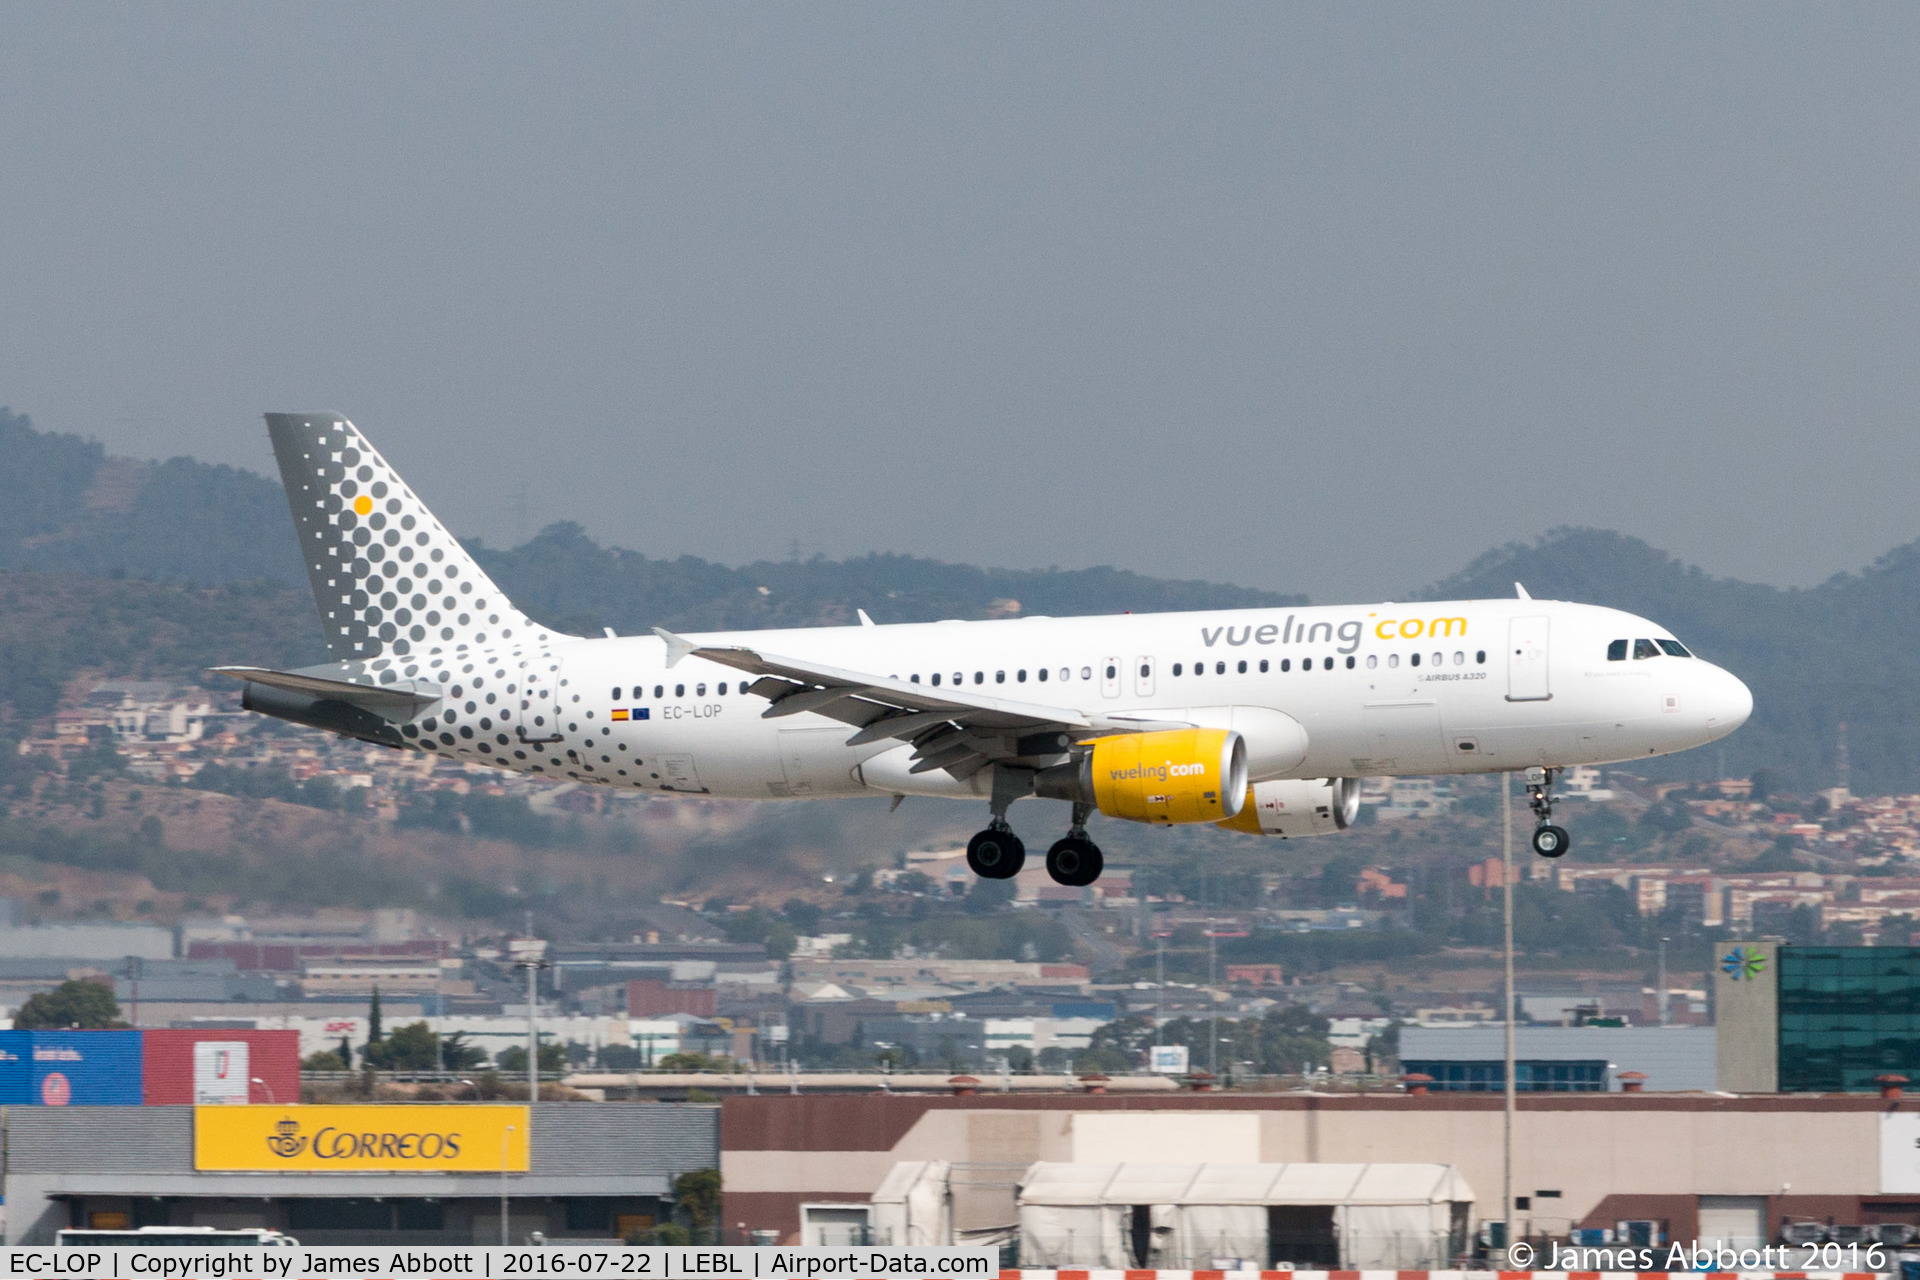 EC-LOP, 2011 Airbus A320-214 C/N 4937, About to land in Barcelona